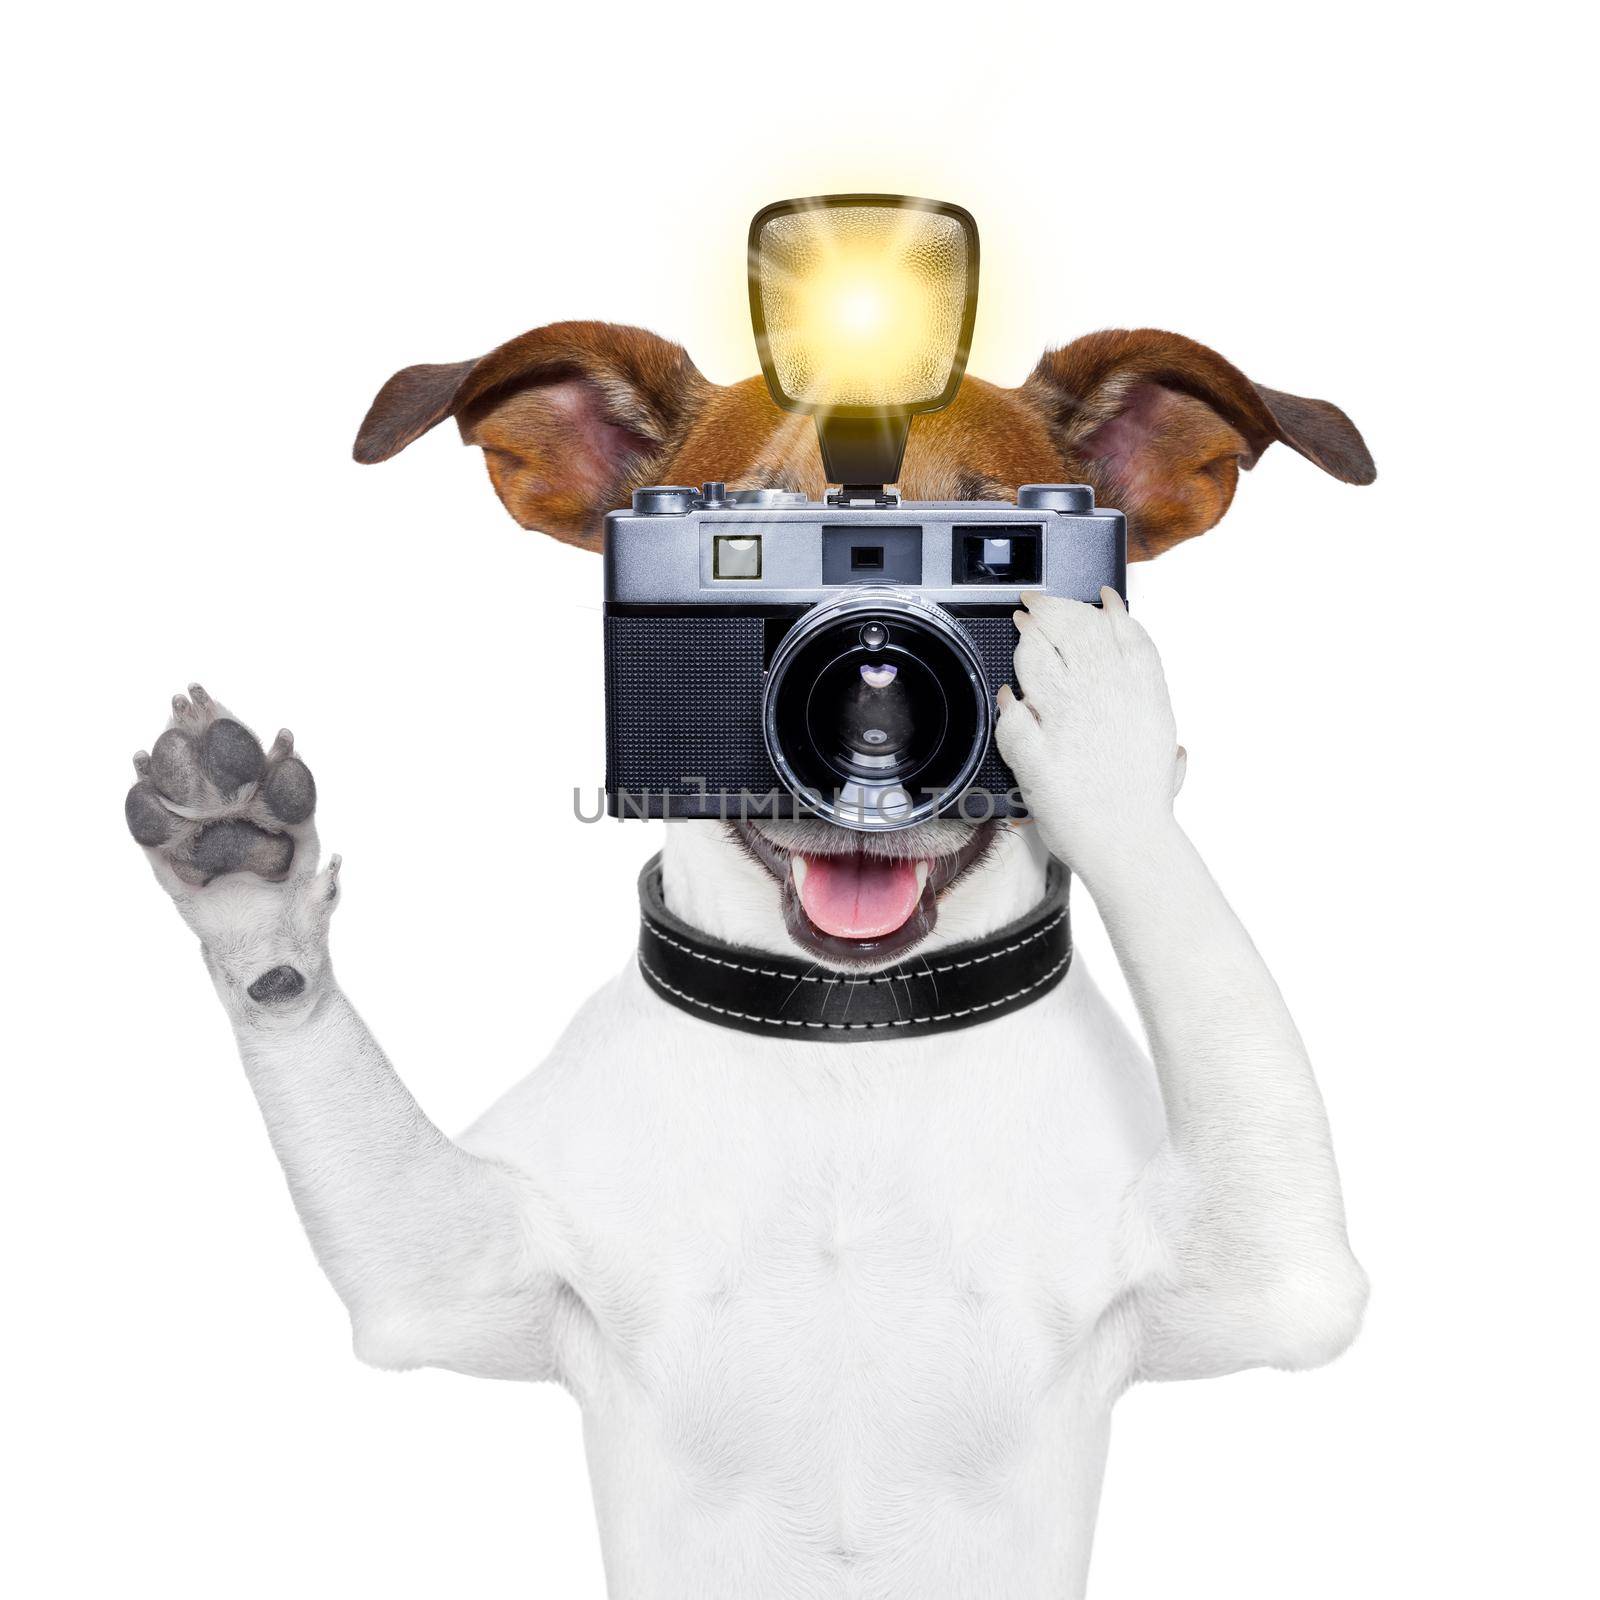 dog taking a photo with an old camera and flashgun